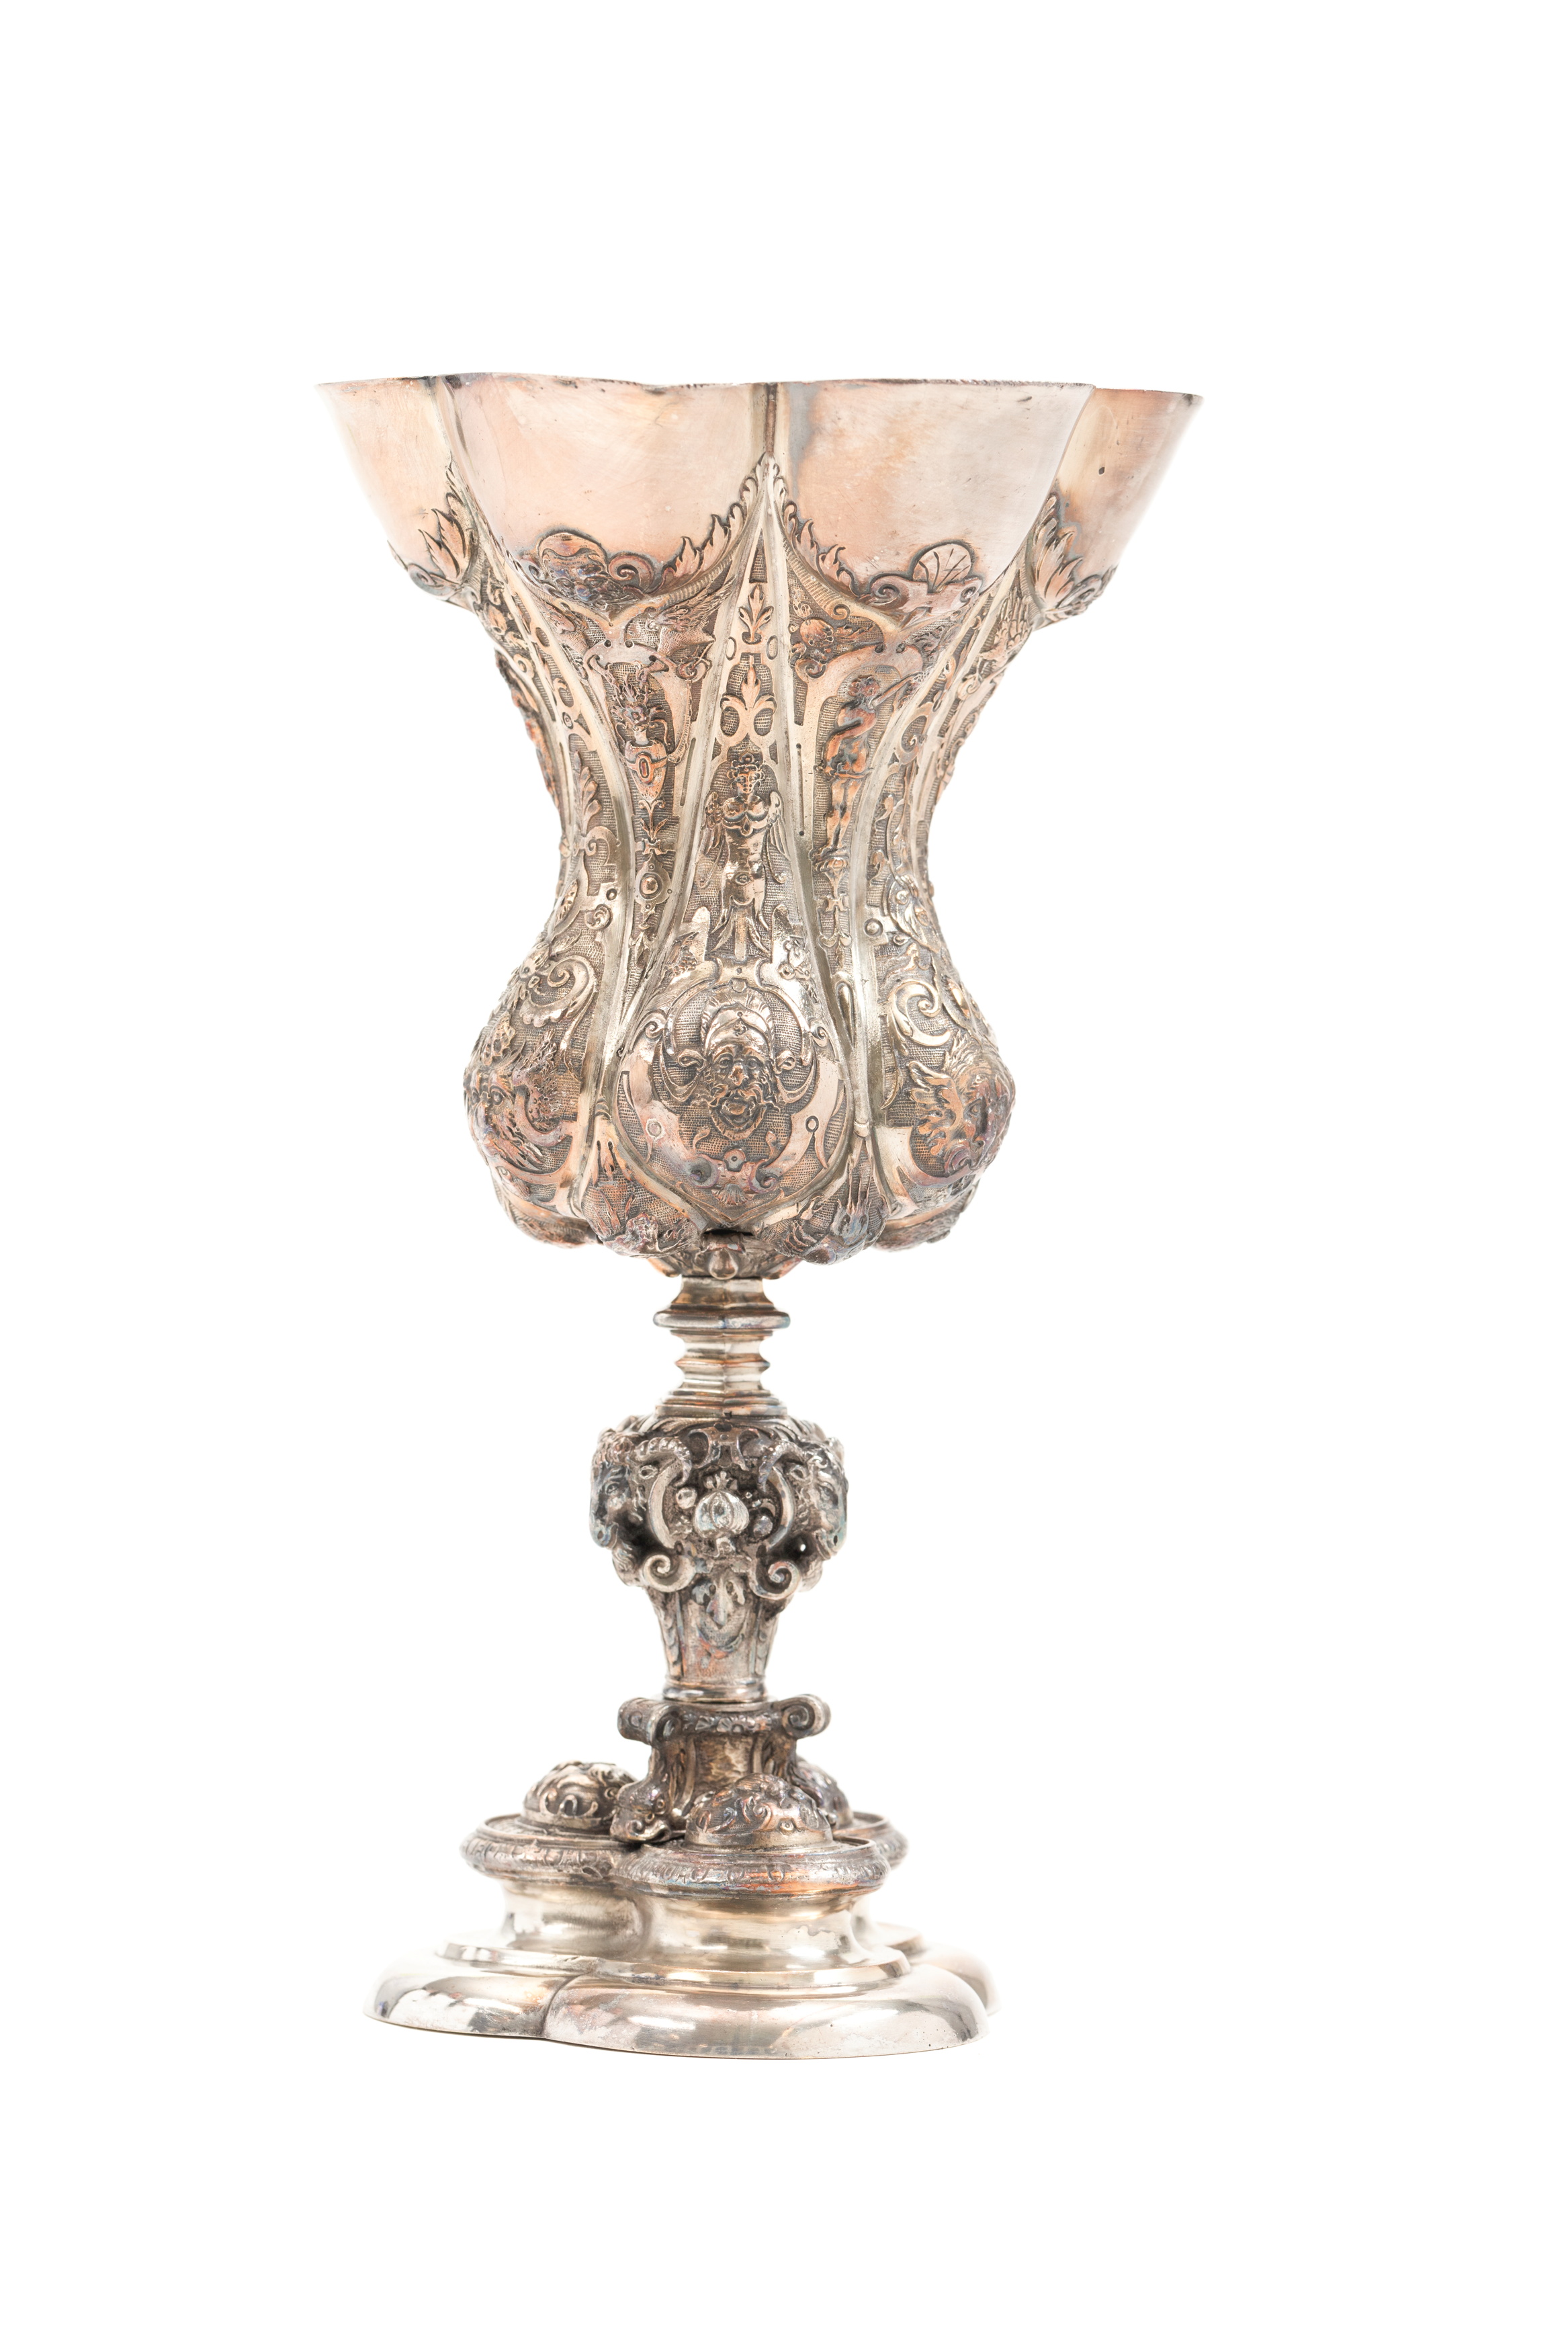 Electrotype reproduction of an original 16th century German cup